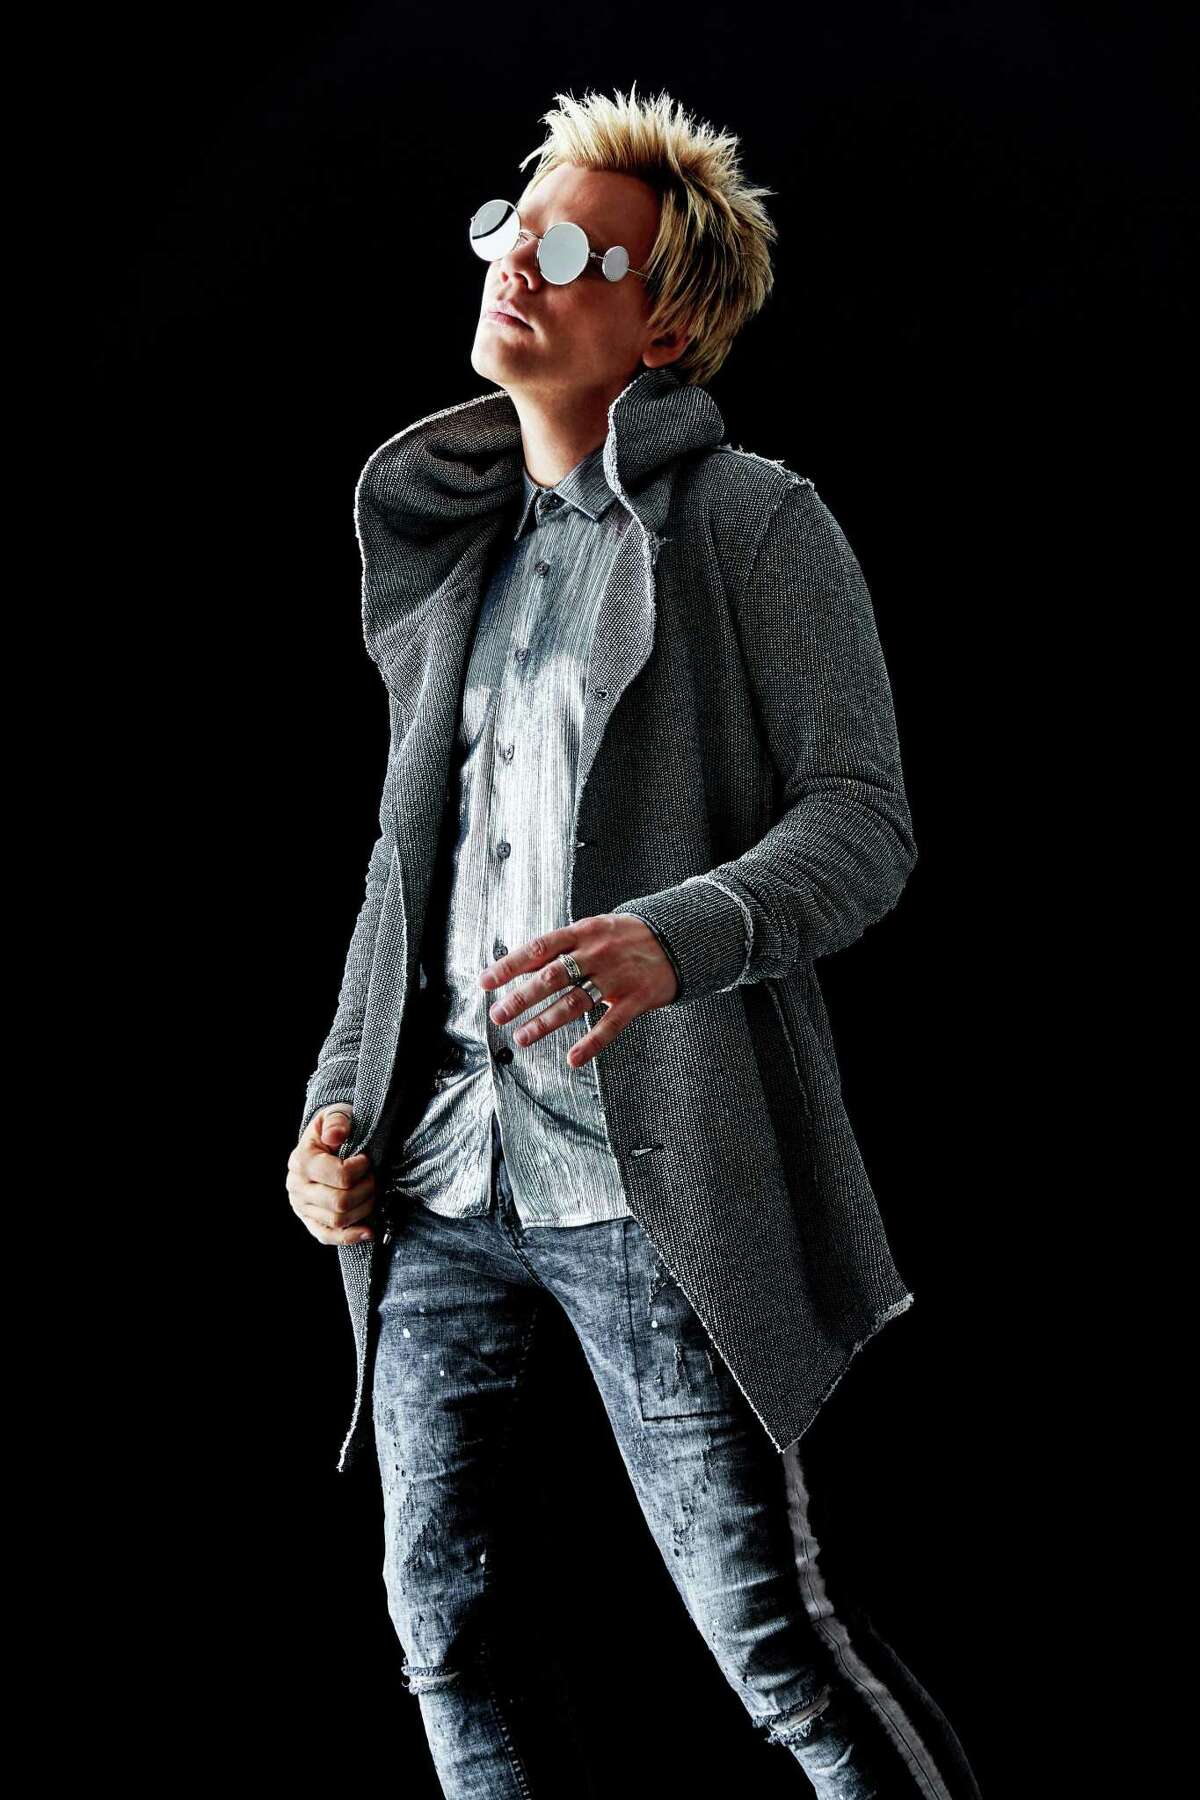 Musician Brian Culbertson is scheduled to perform April 8 at the Lyman Center in New Haven.